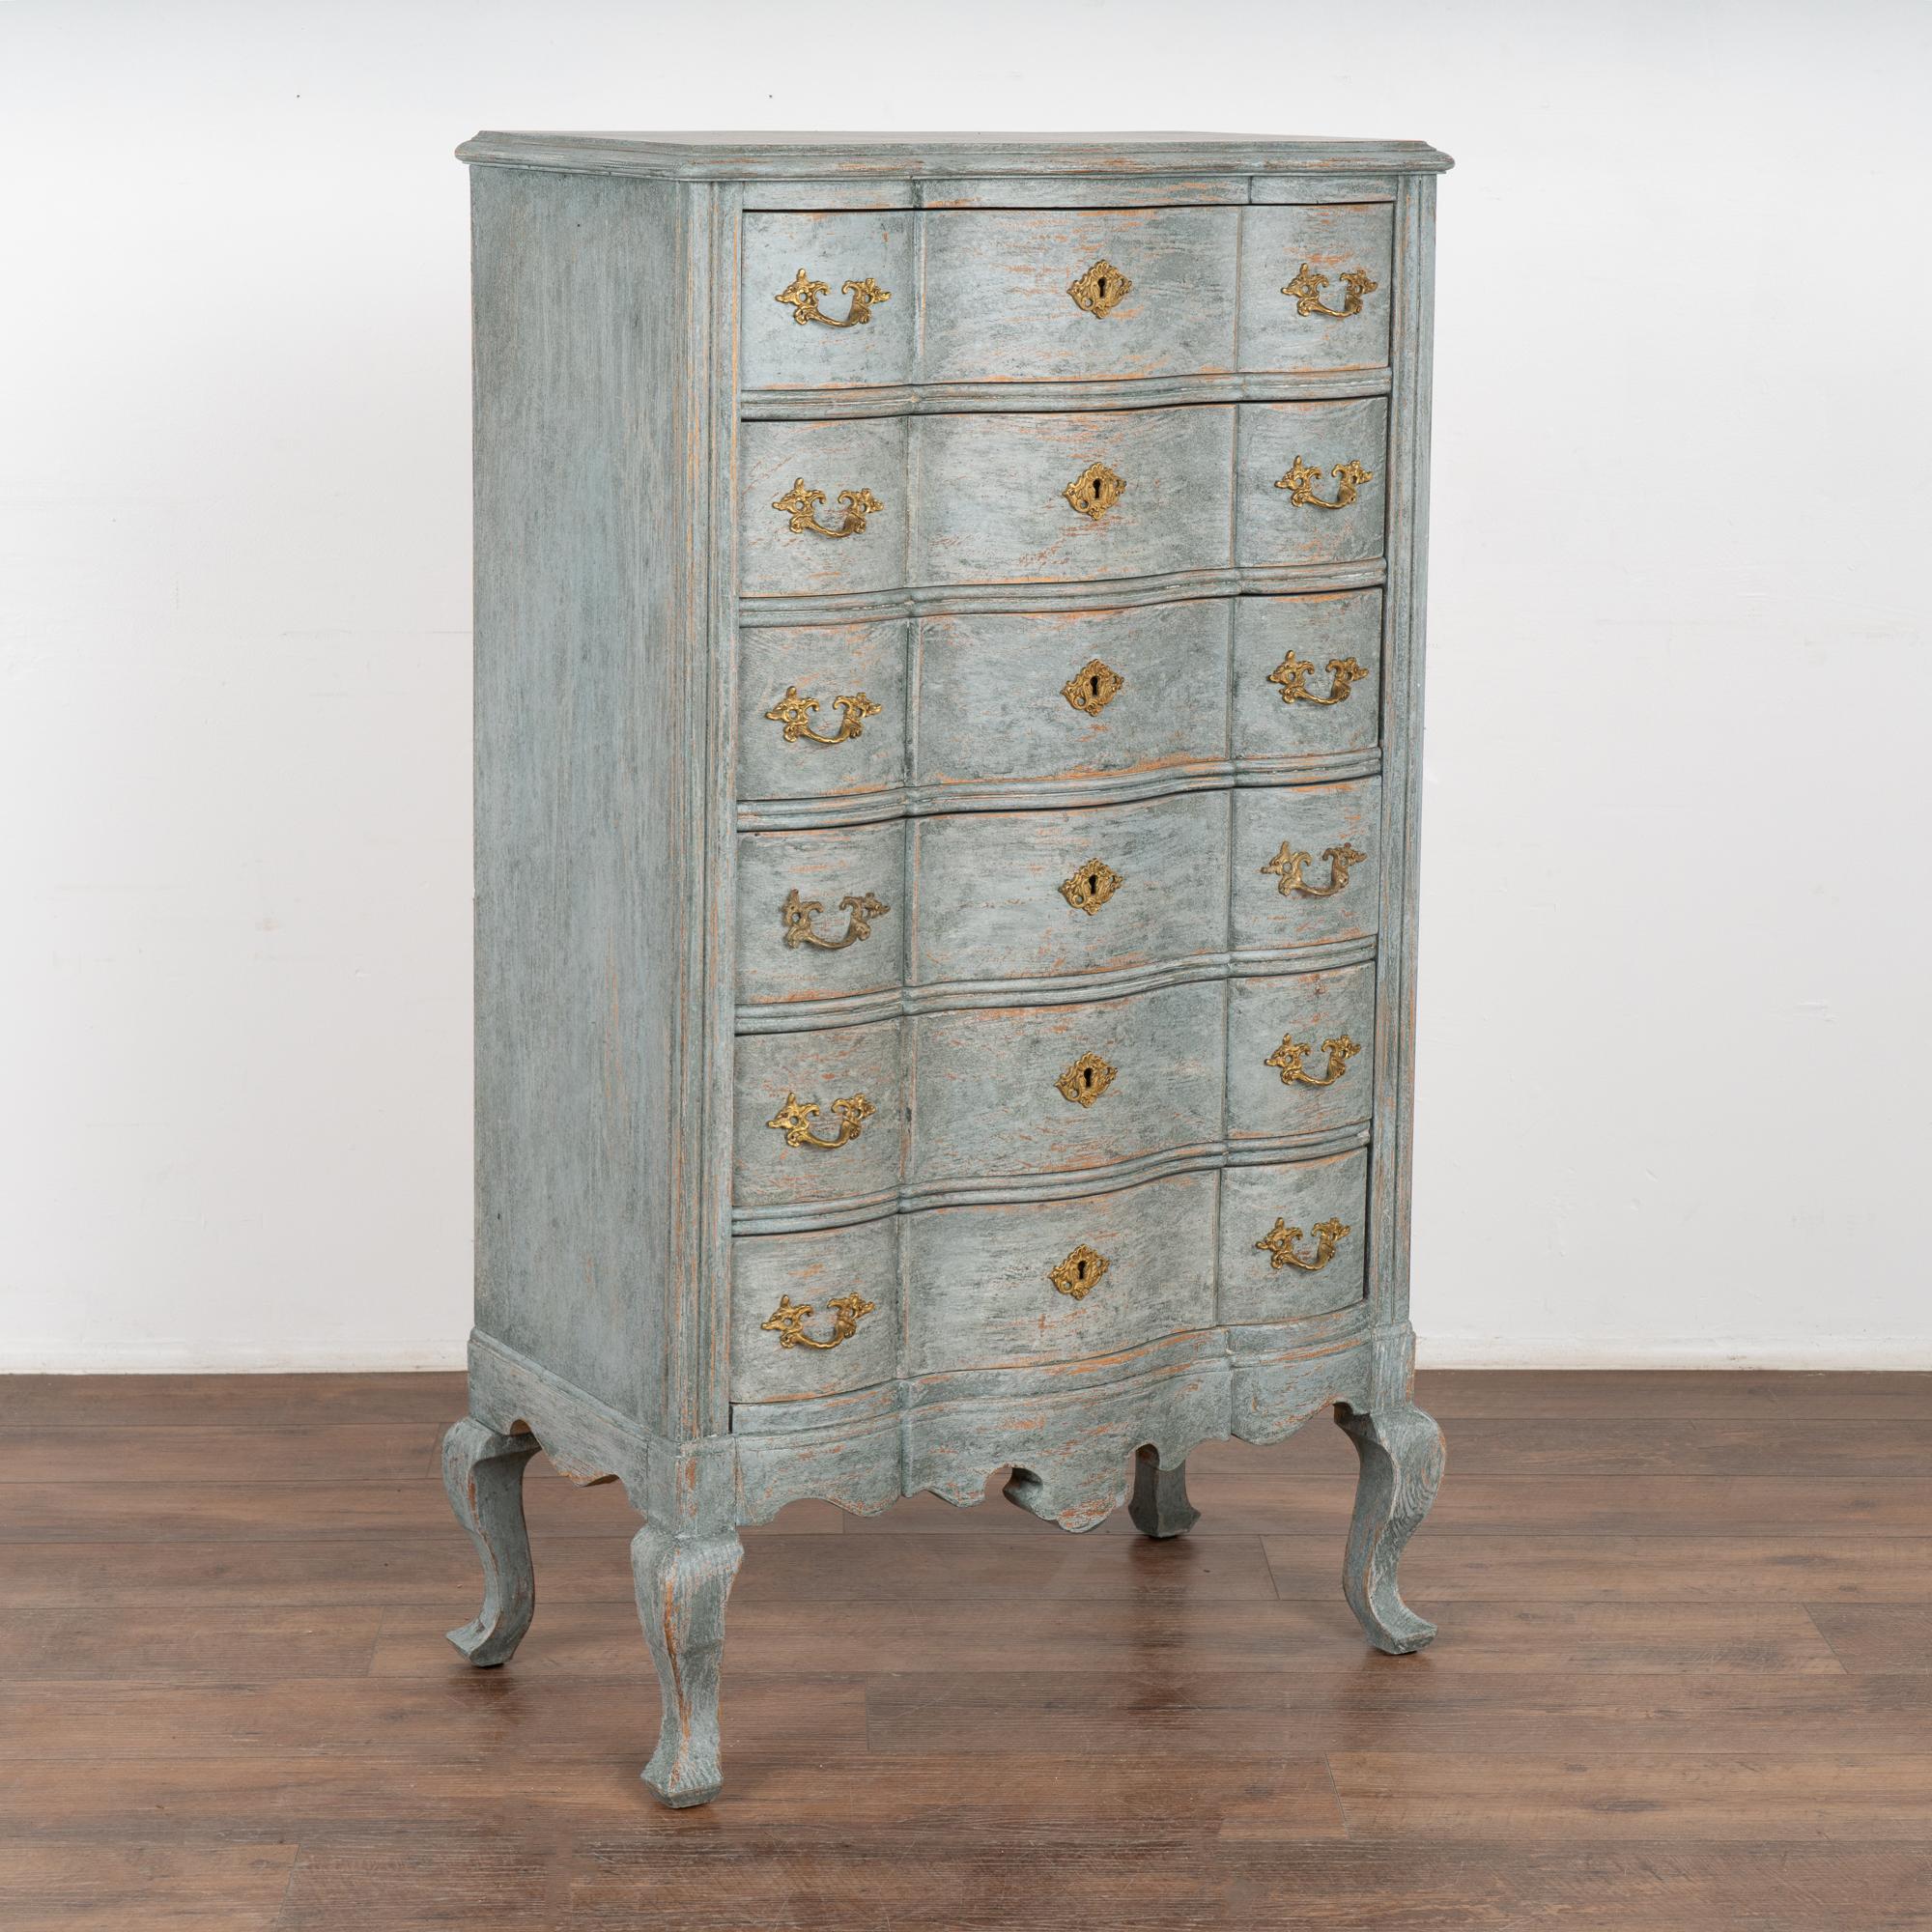 A tall narrow rococo chest of six drawers with brass pulls and key escutcheons. The scalloped edge is carried down through the 6 drawer fronts and bottom apron resulting in an elegant chest all resting on four cabriole legs.
Restored and drawers